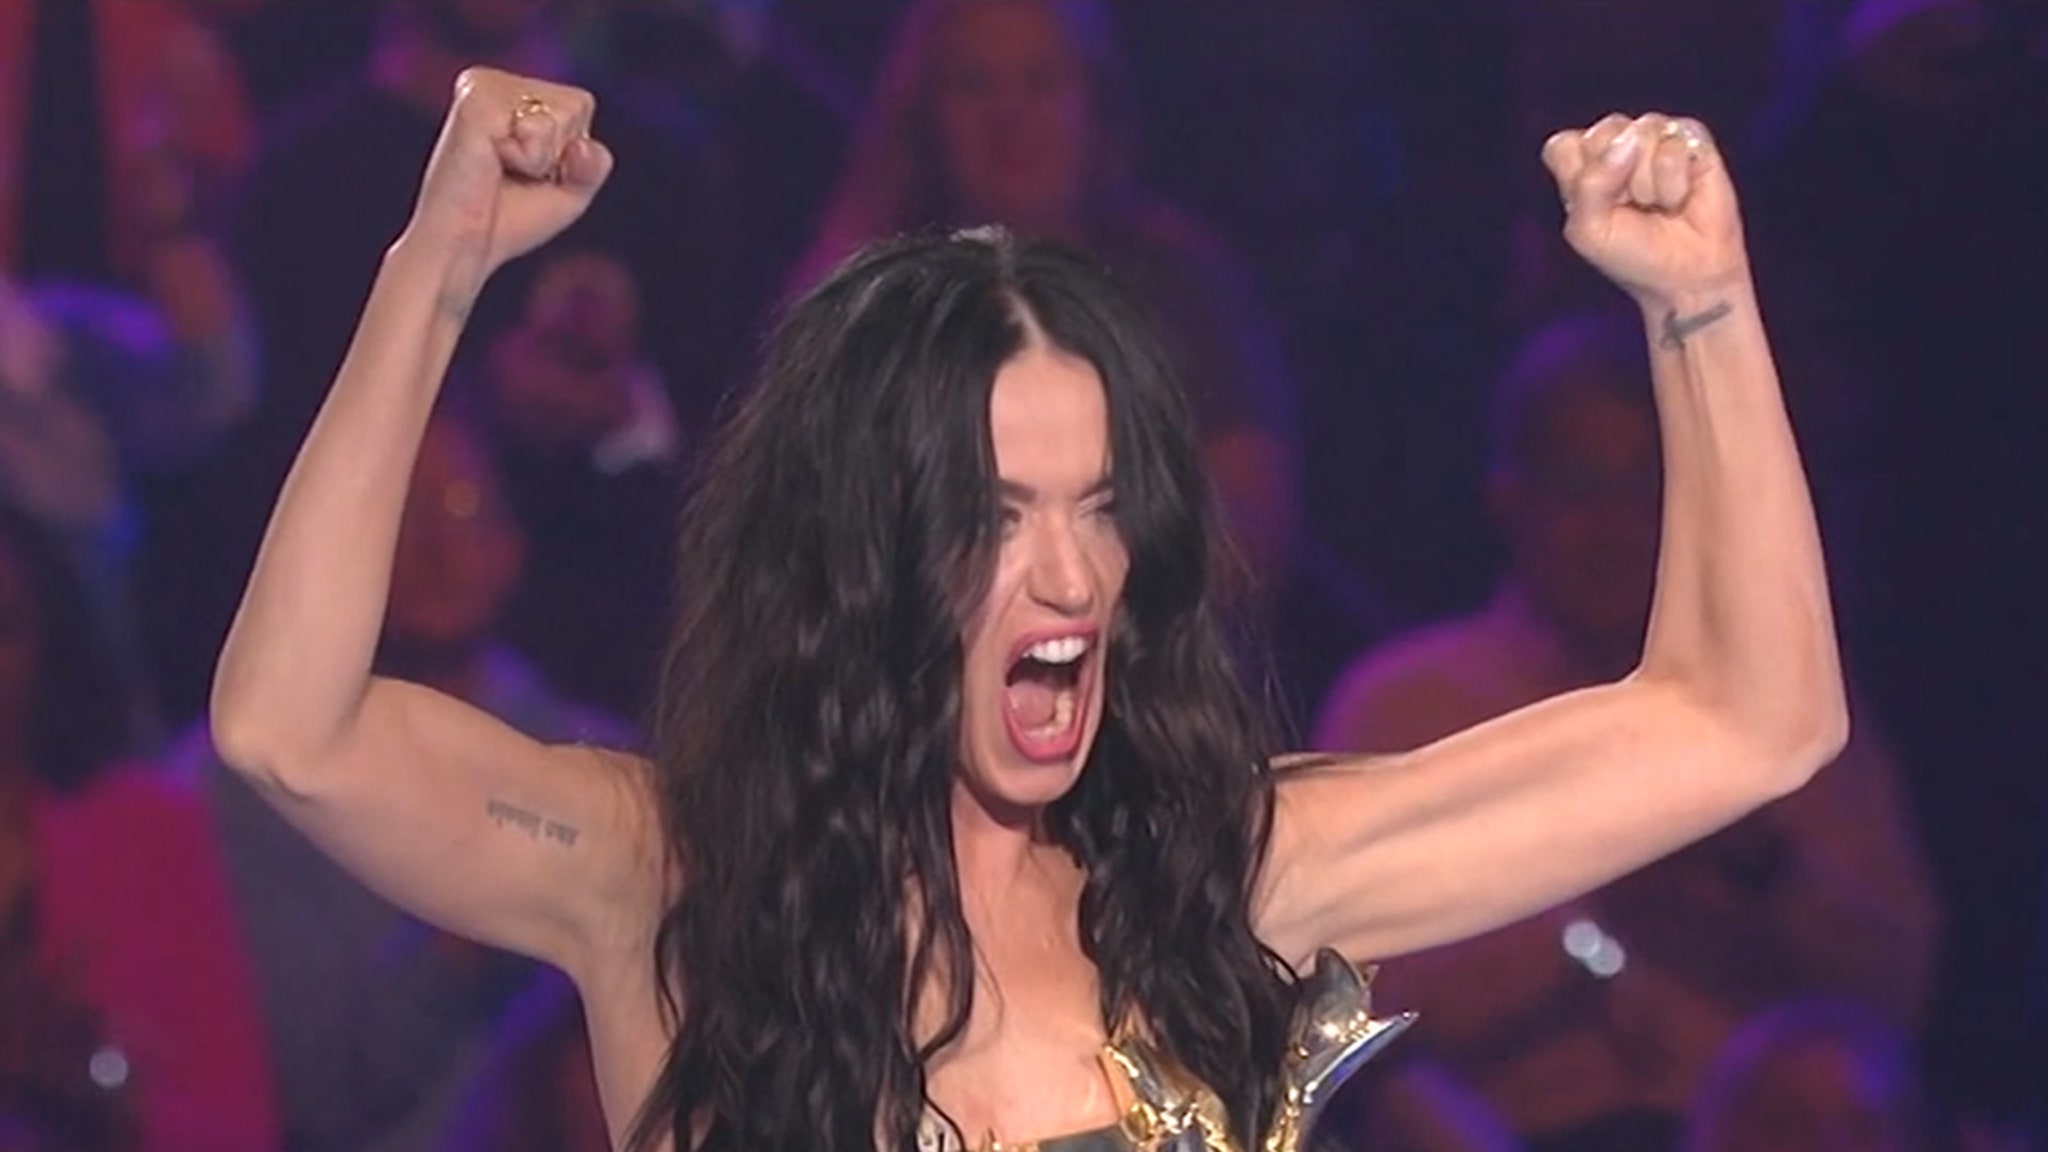 Katy Perry Gets Awesome ‘American Idol’ Tribute on Her Final Episode